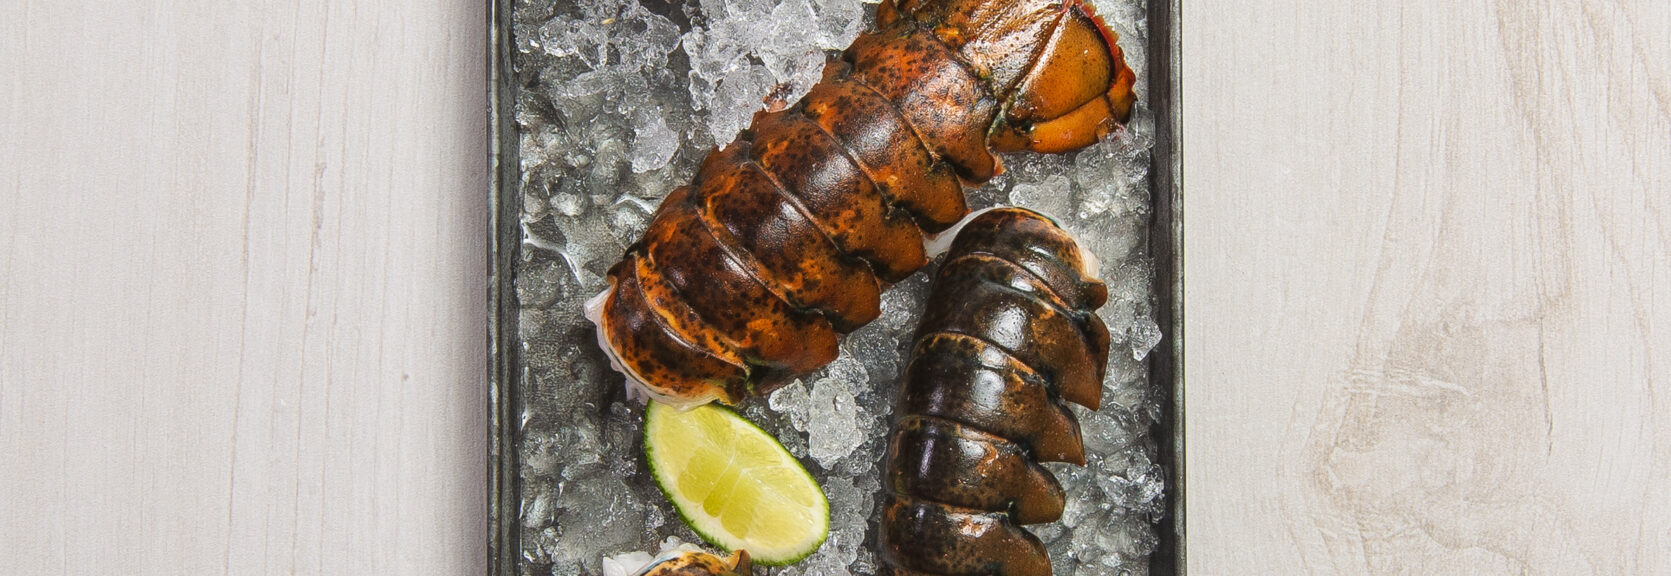 Processing Fundamentals: Preparing Maine Lobster Products recipe image